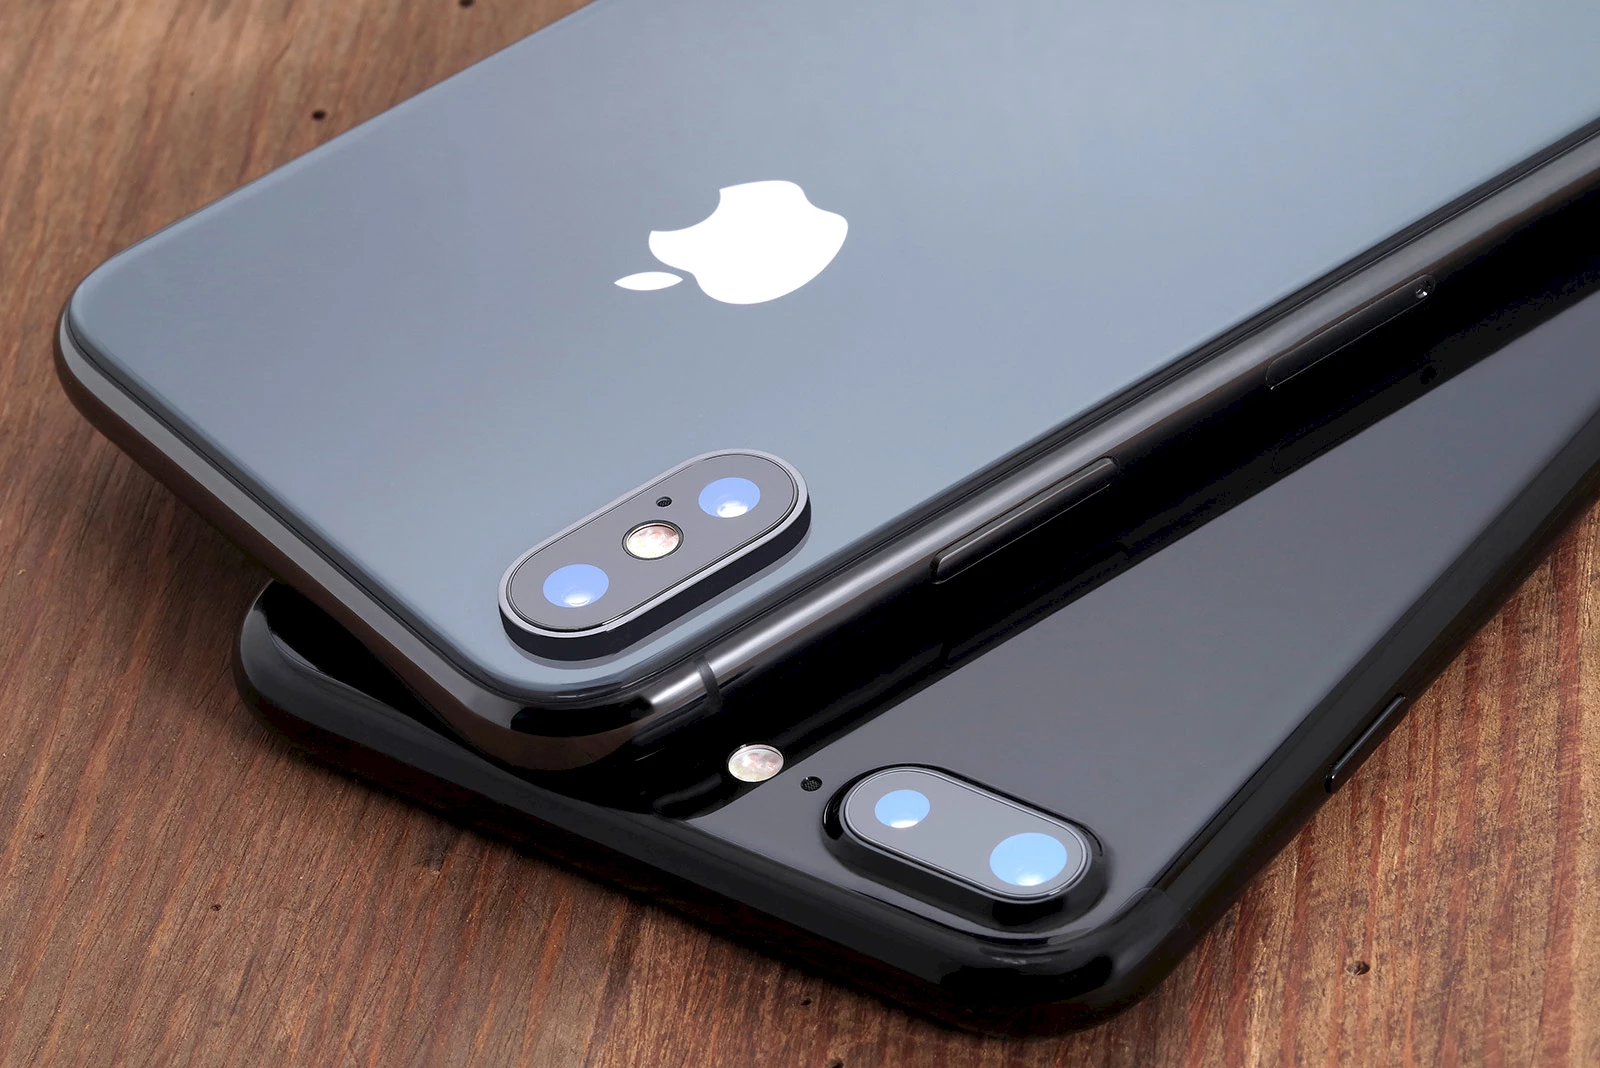 Space gray iPhone X and black iPhone 7.